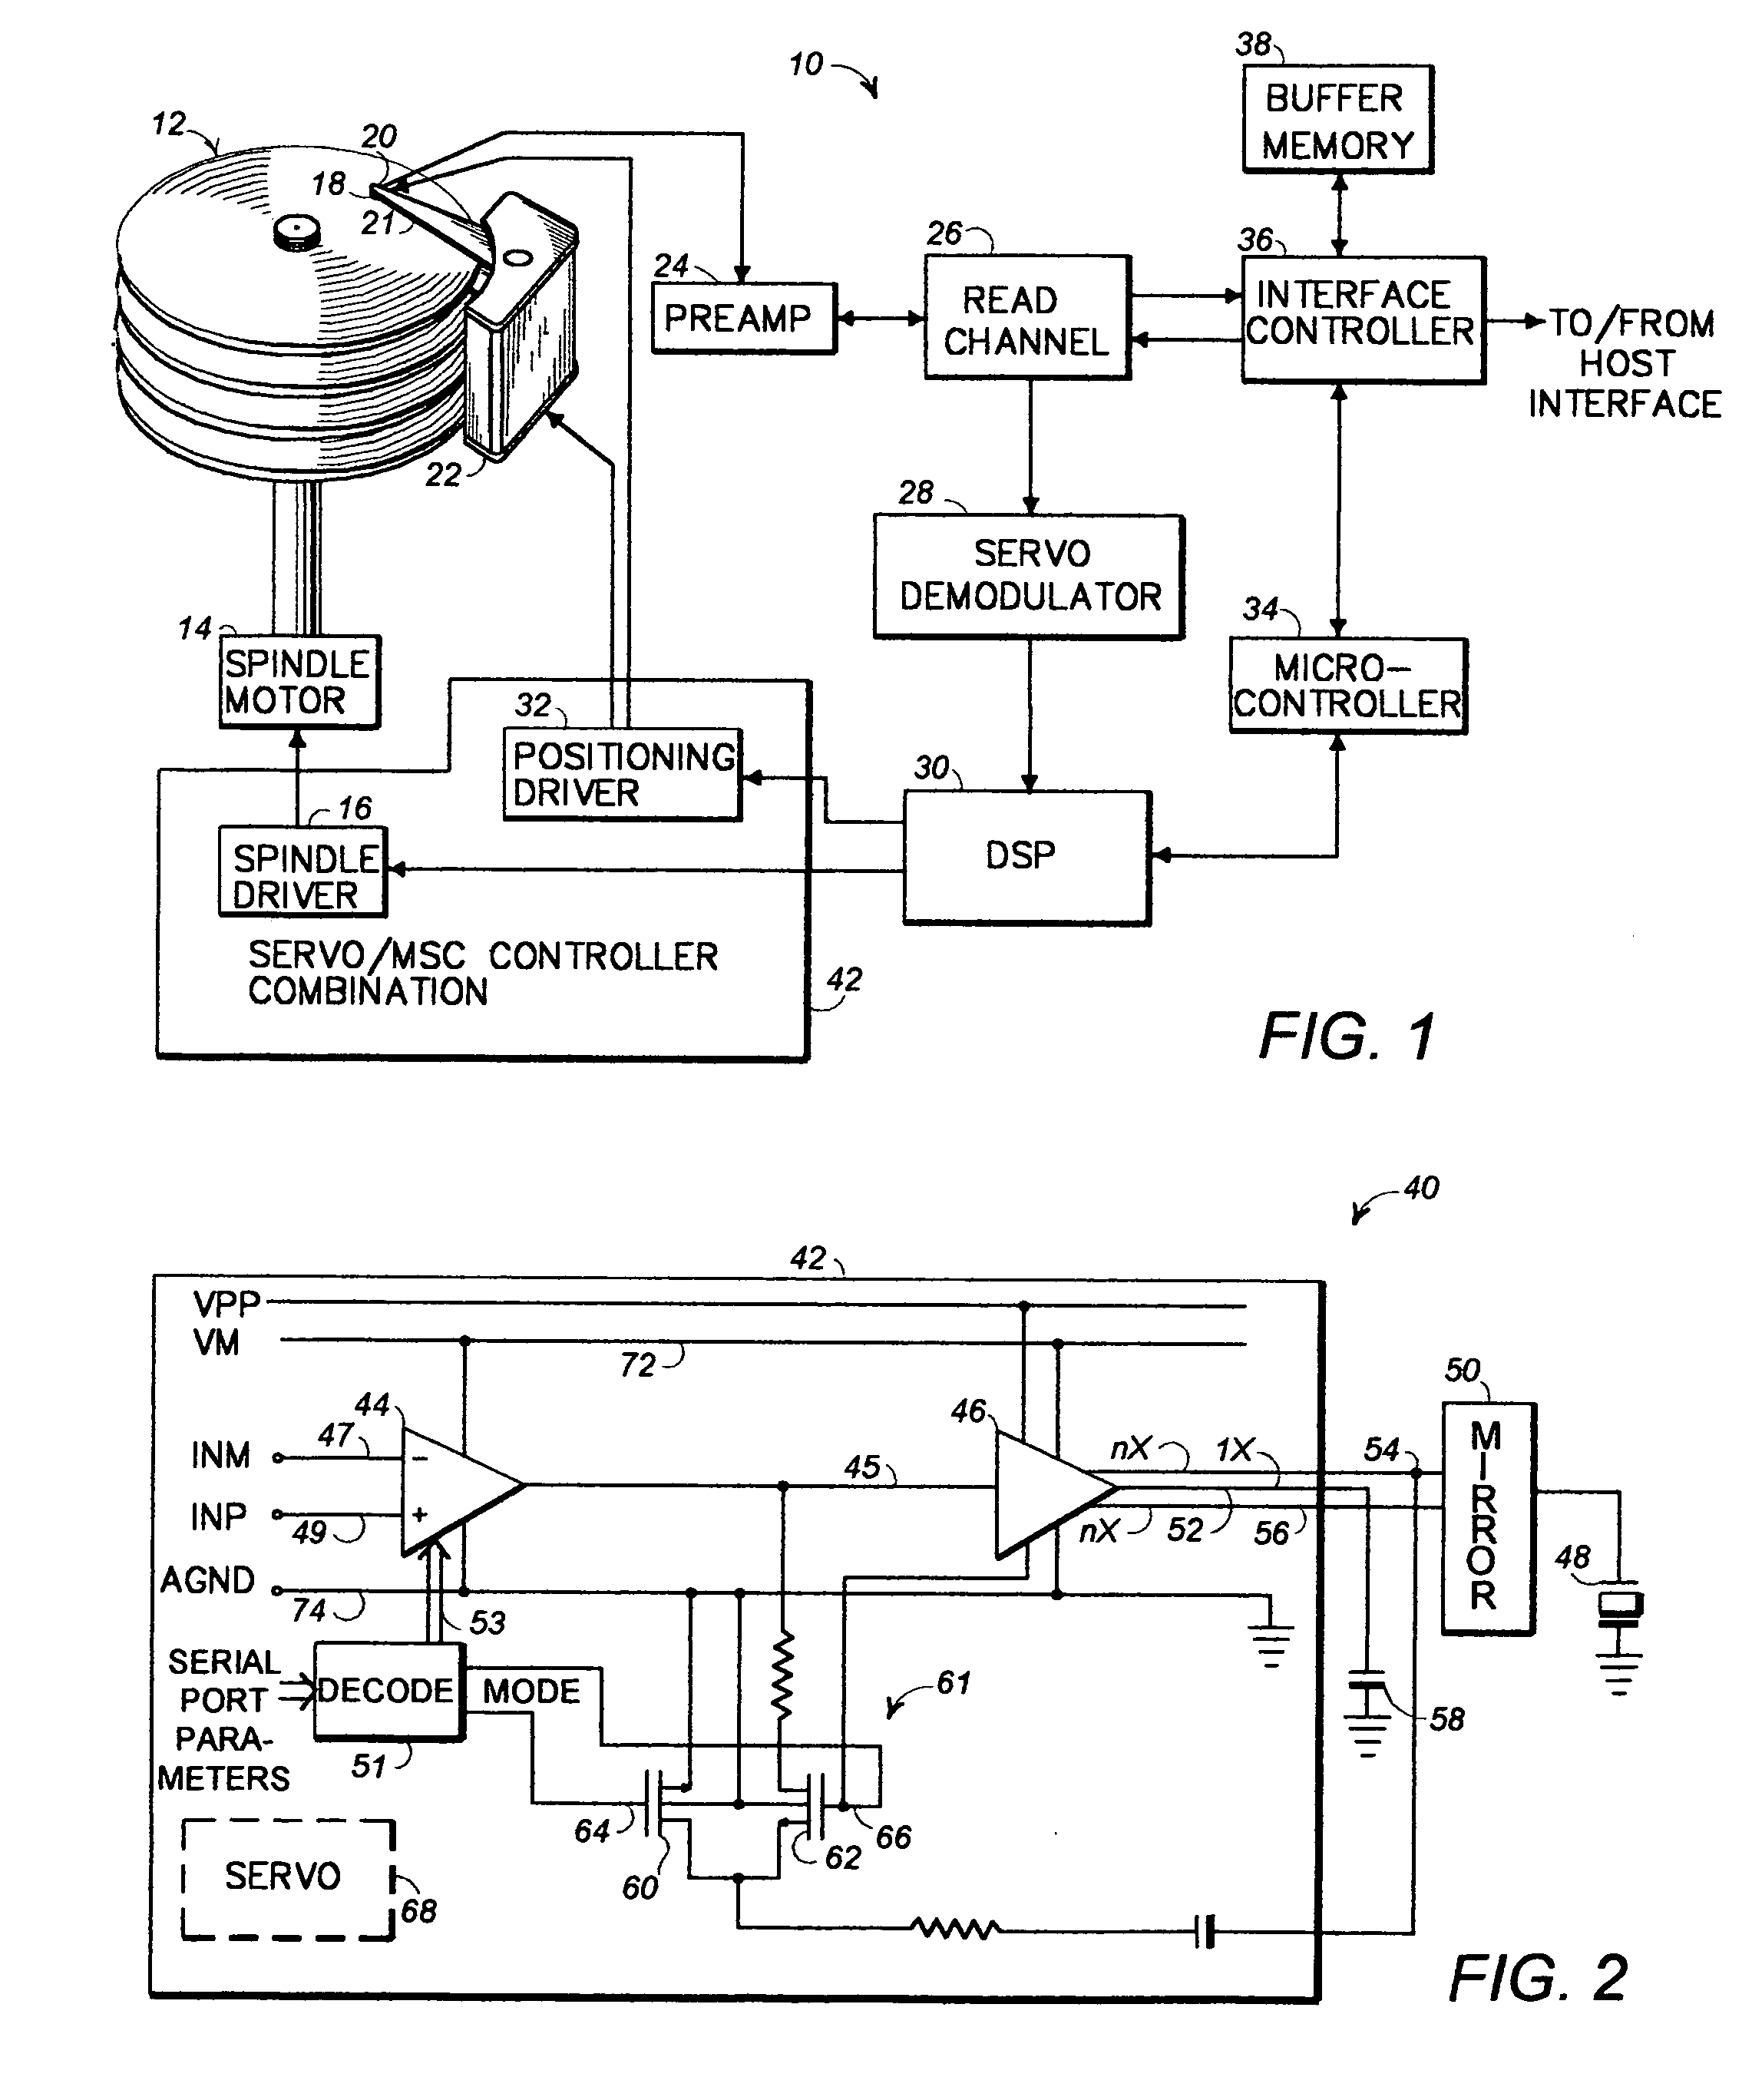 Adjustable compensation of a piezo drive amplifier depending on mode and number of elements driven